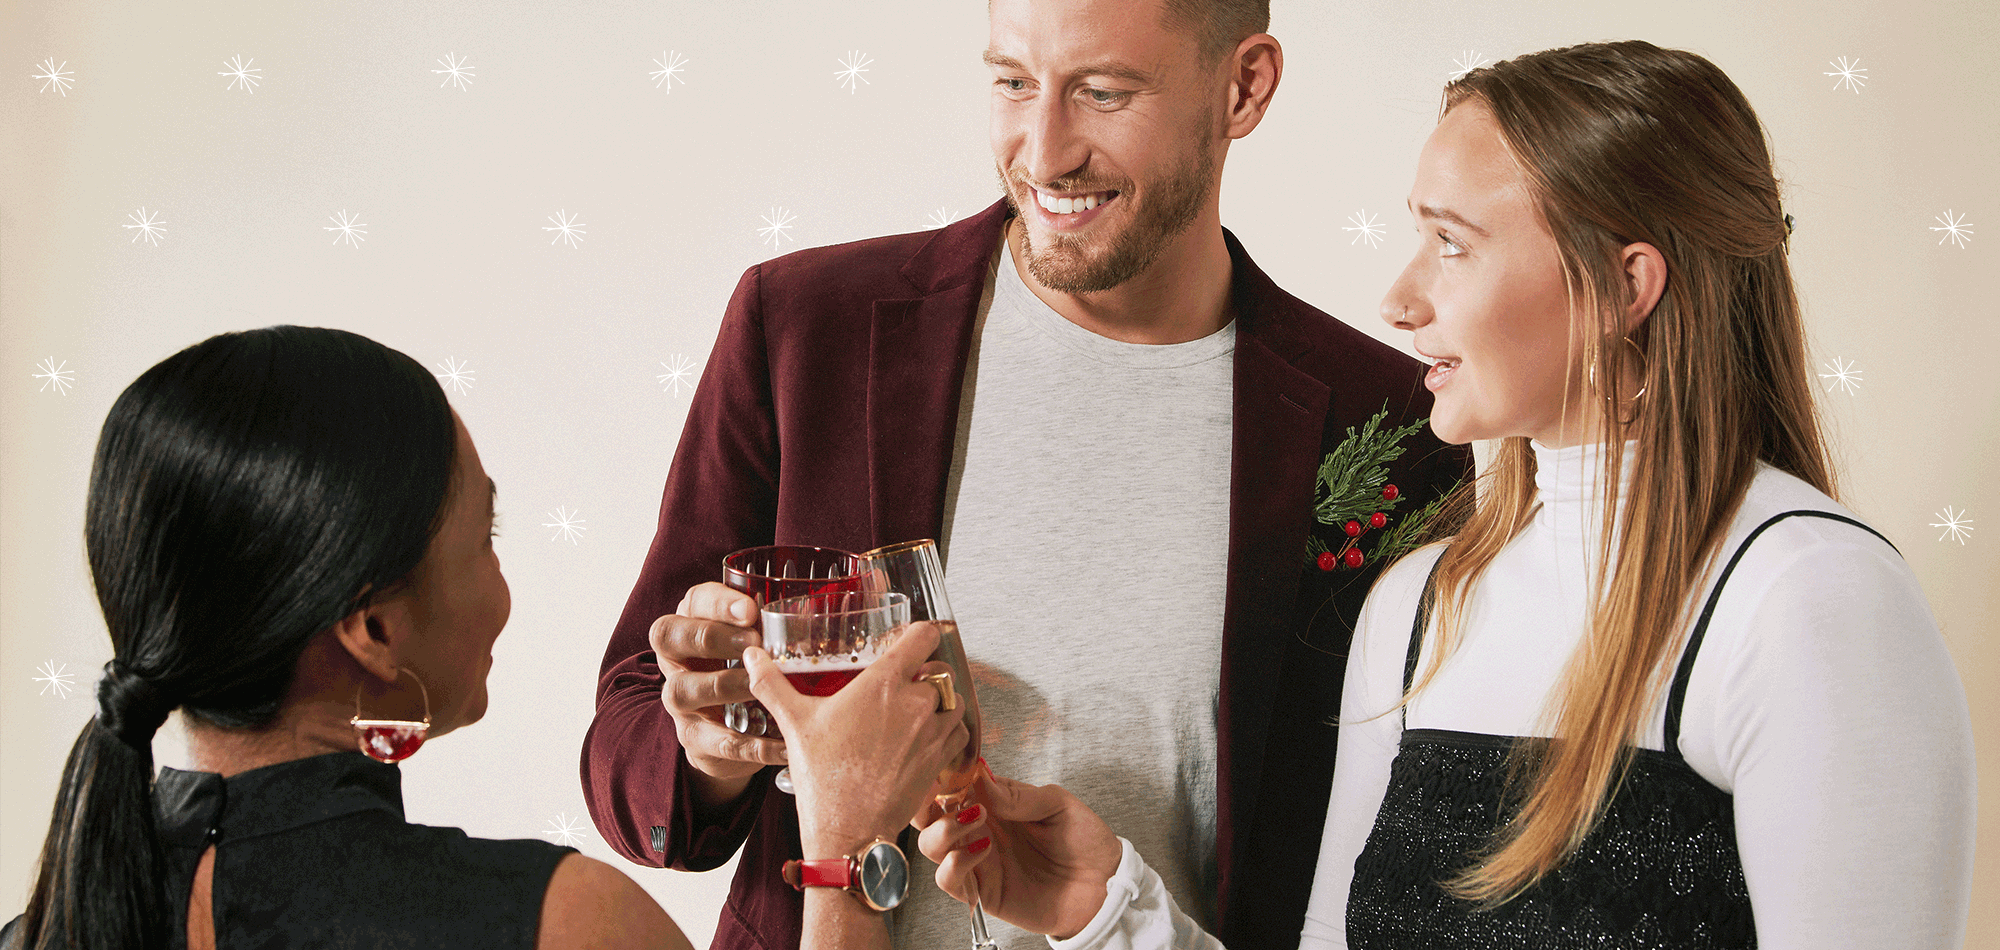 Image of Laura, Matt, and Haley toasting their drinks while wearing festive, holiday clothing